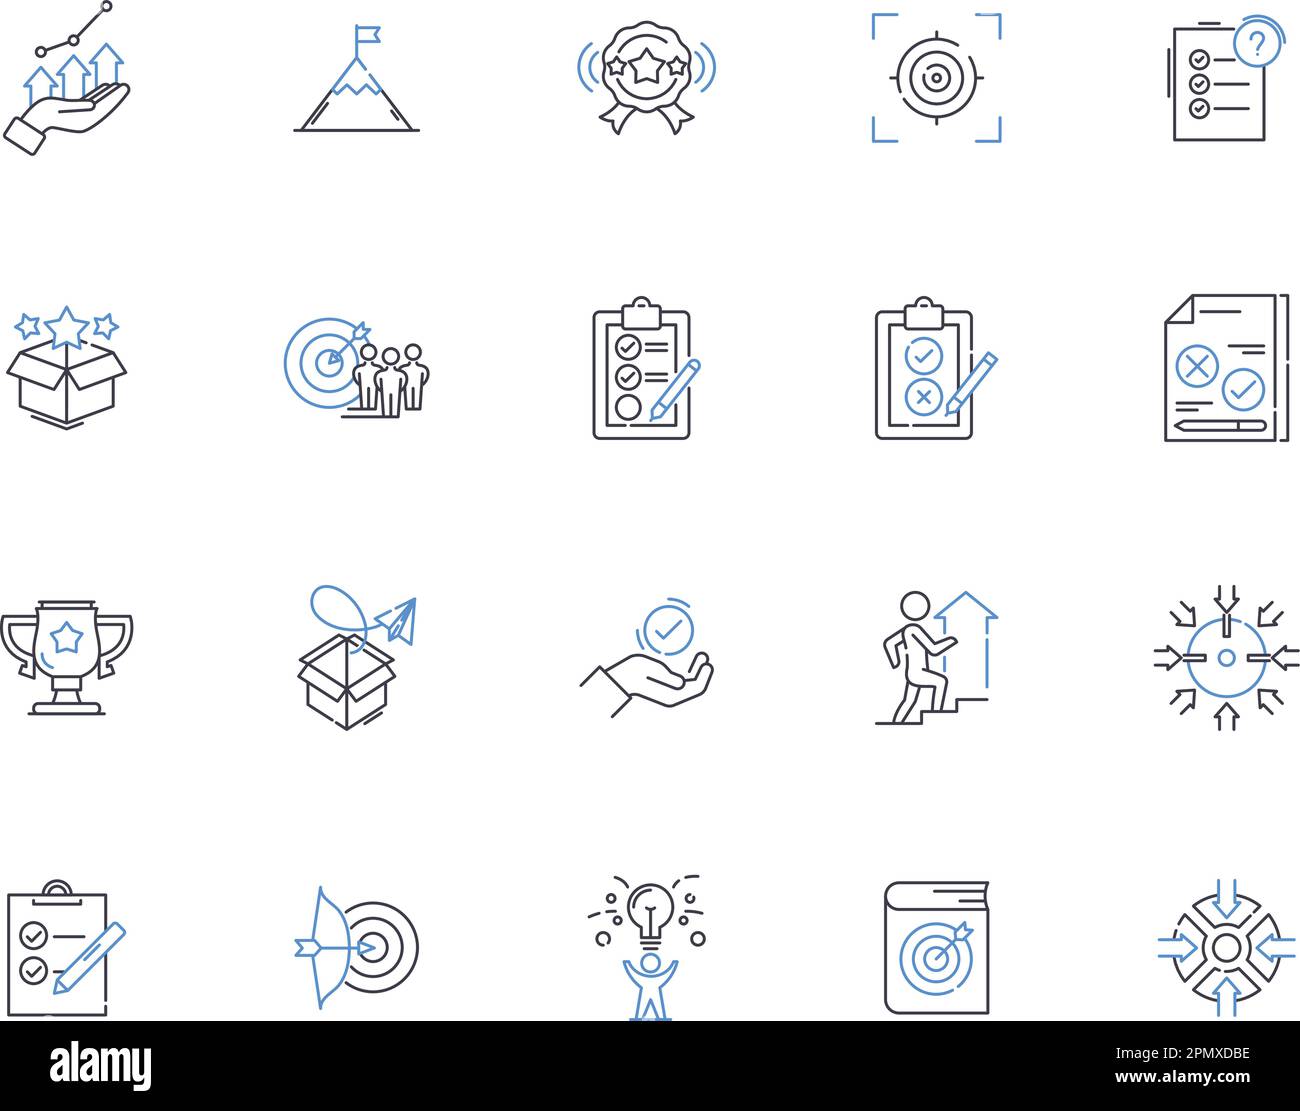 Goals outline icons collection. Aims, Objectives, Targets, Ambitions, Aspirations, Hopes, Intents vector and illustration concept set. Outcomes Stock Vector